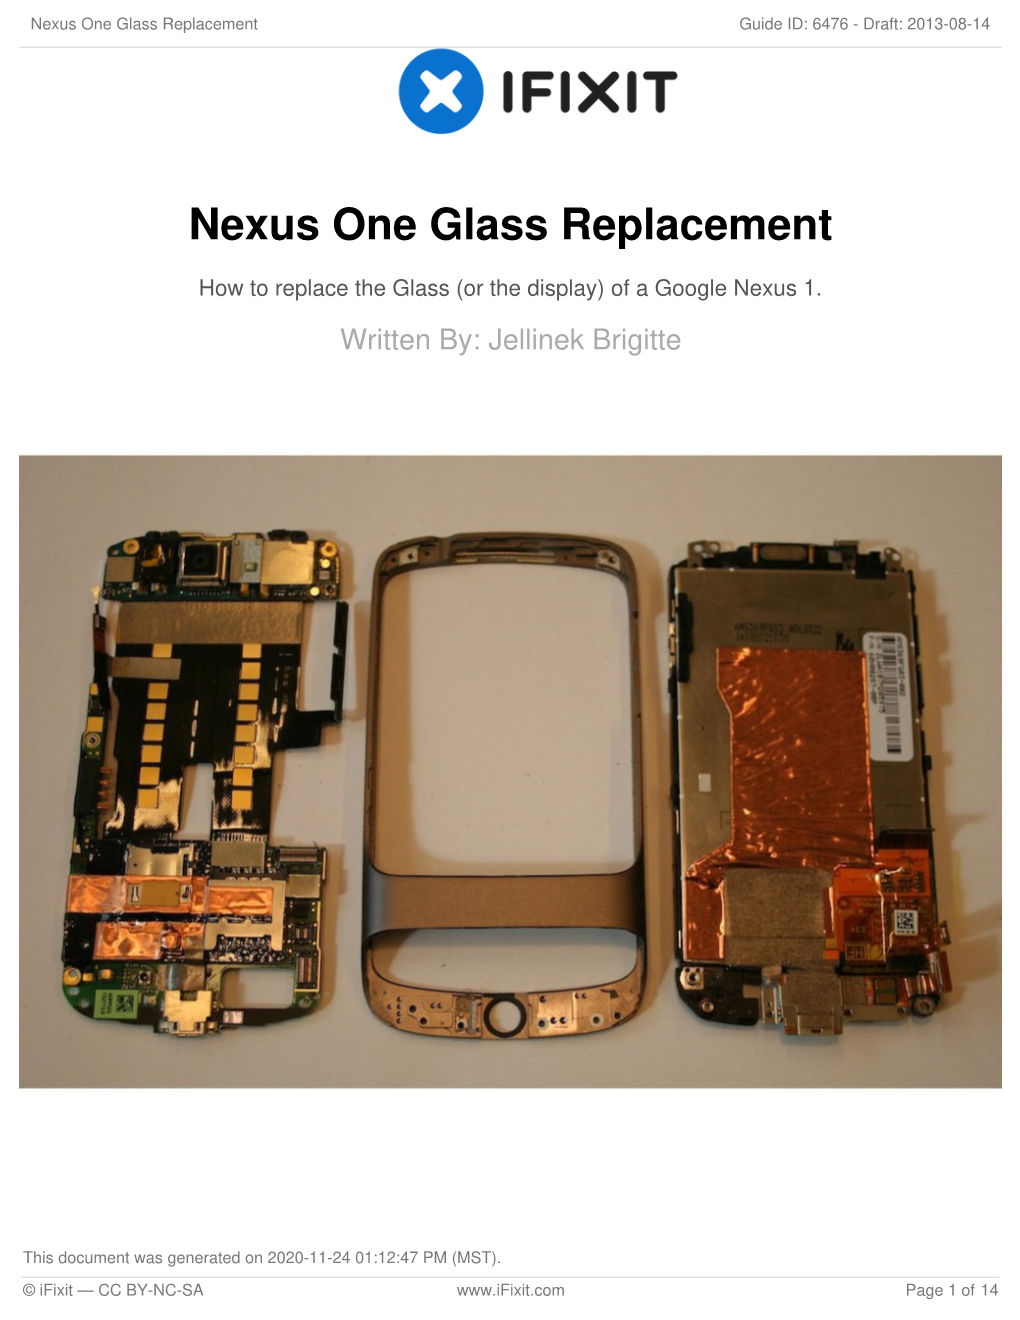 Nexus One Glass Replacement Guide ID: 6476 - Draft: 2013-08-14